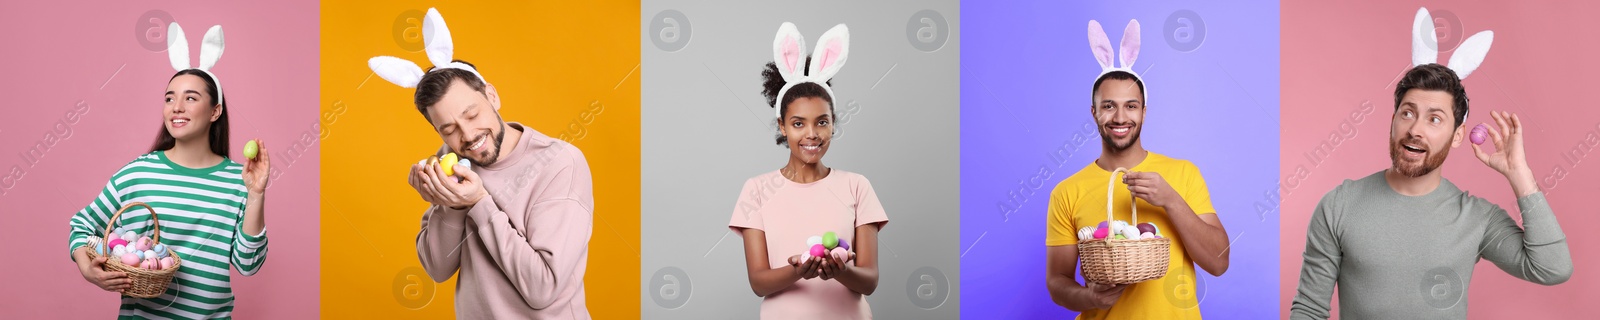 Image of Photos of people with Easter eggs and bunny ears headbands on different color backgrounds. Collage design